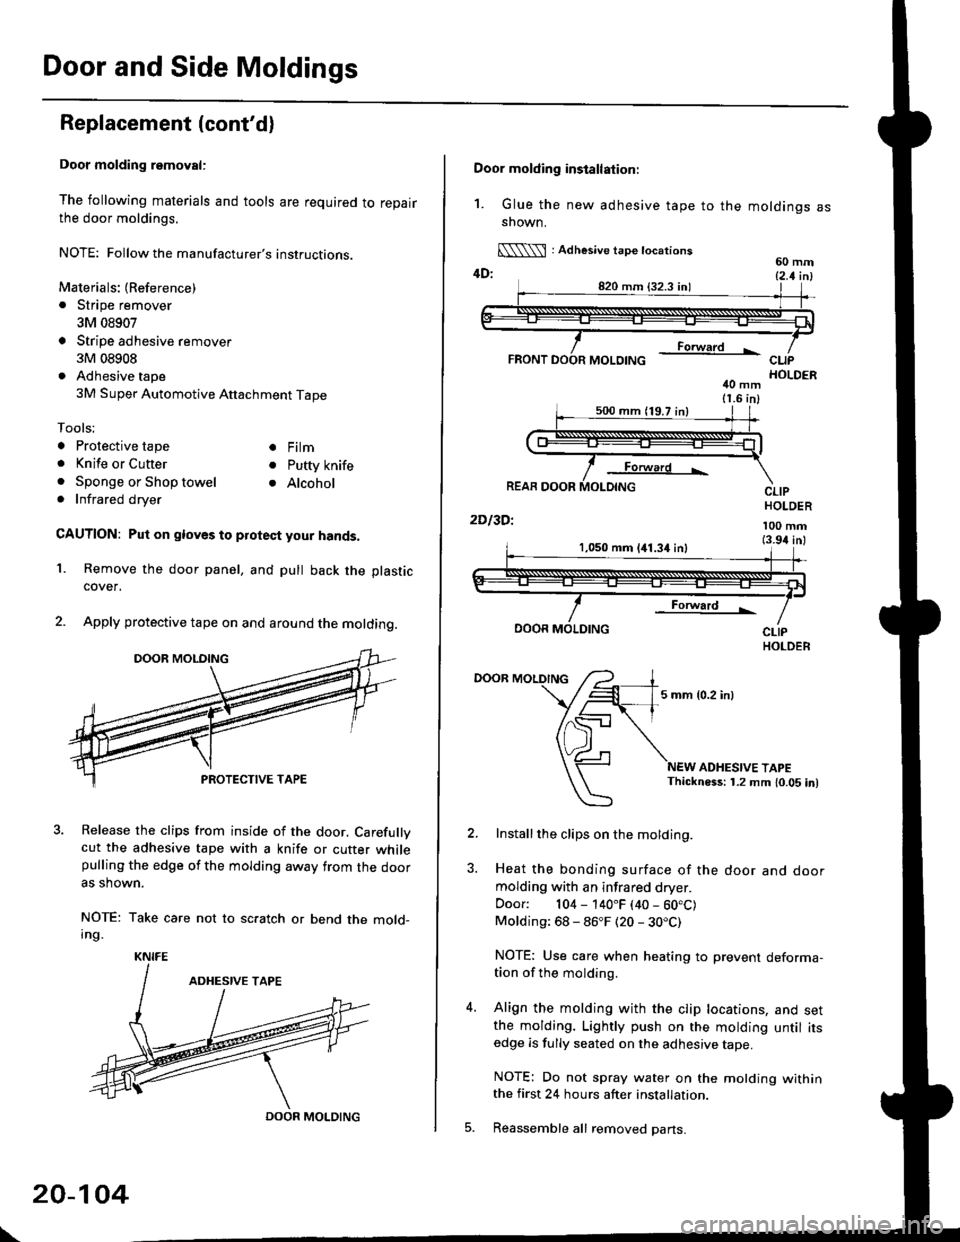 HONDA CIVIC 1996 6.G Workshop Manual Door and Side Moldings
Replacement (contdl
Door molding removal:
The following materials and tools are required to repairthe door moldings.
NOTE: Followthe manufacturers instructions.
Materials: (Re